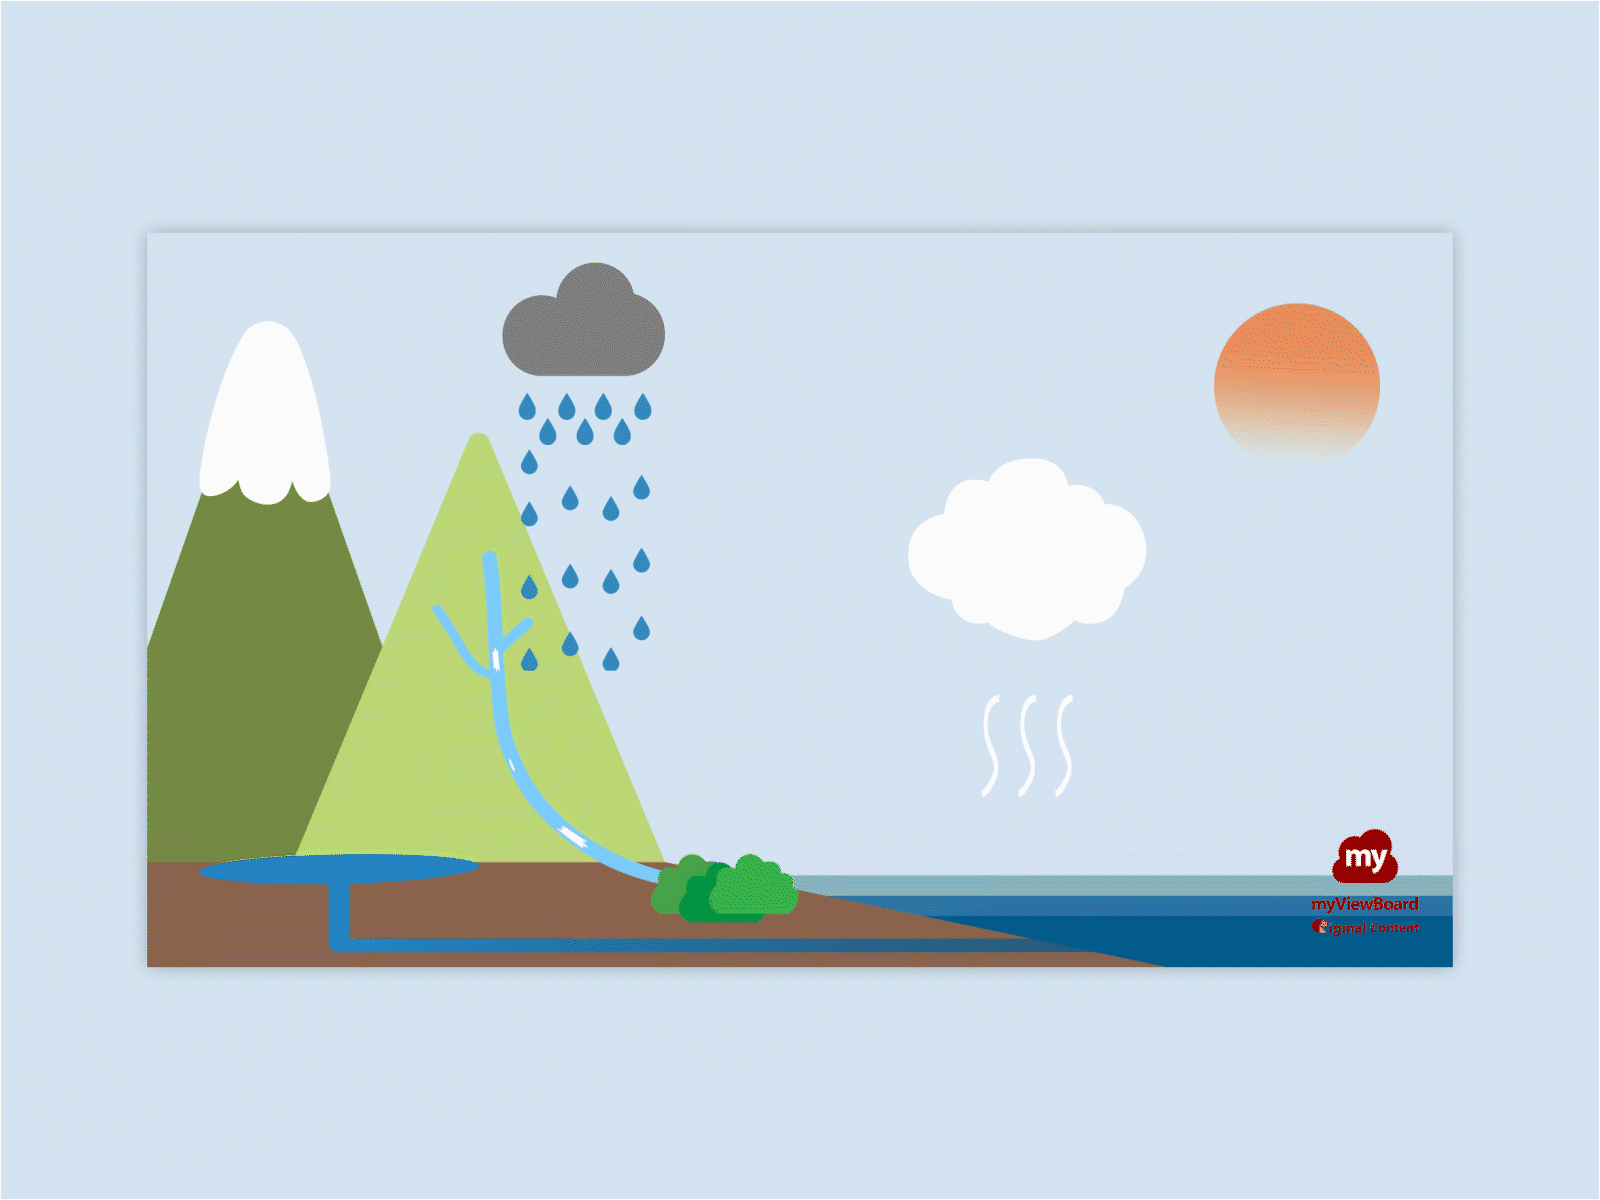 Water cycle illustration